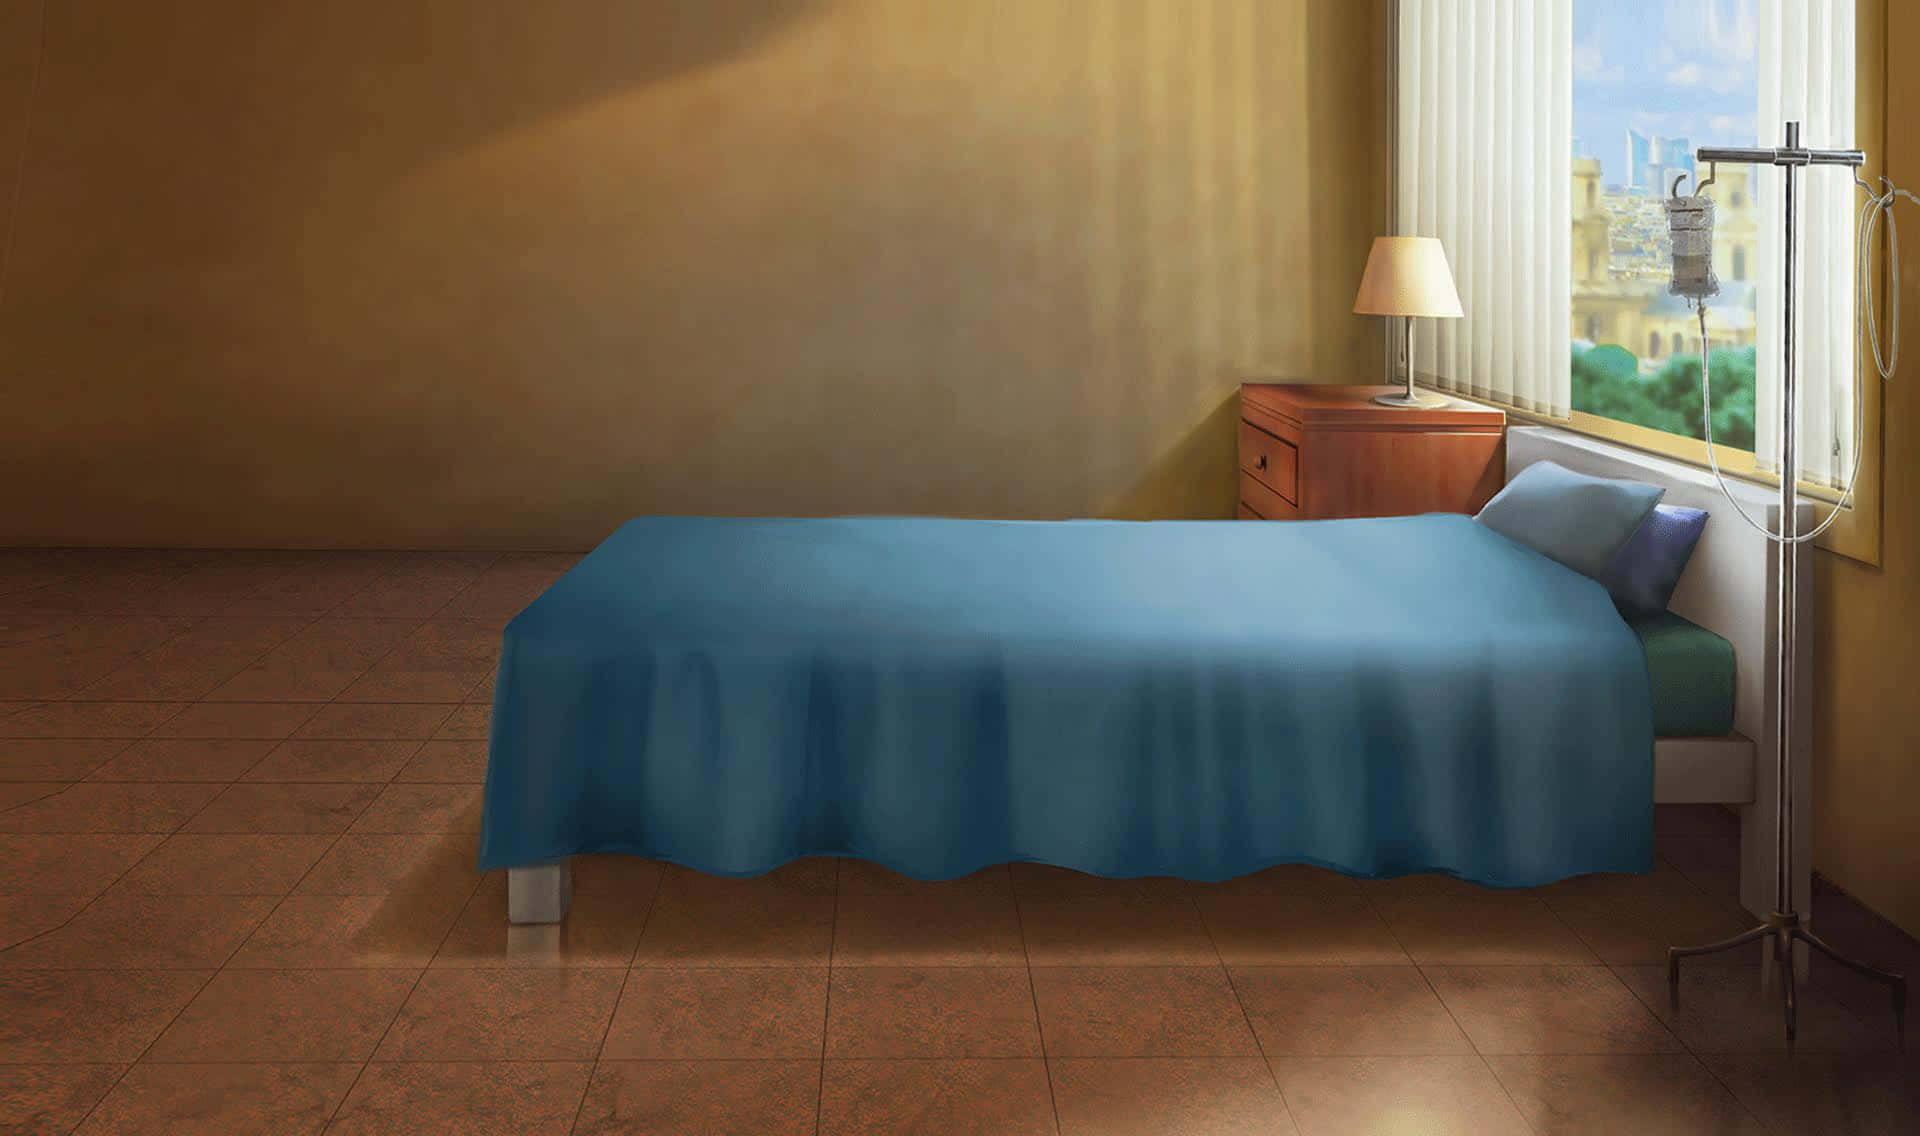 A Bed With A Blue Blanket